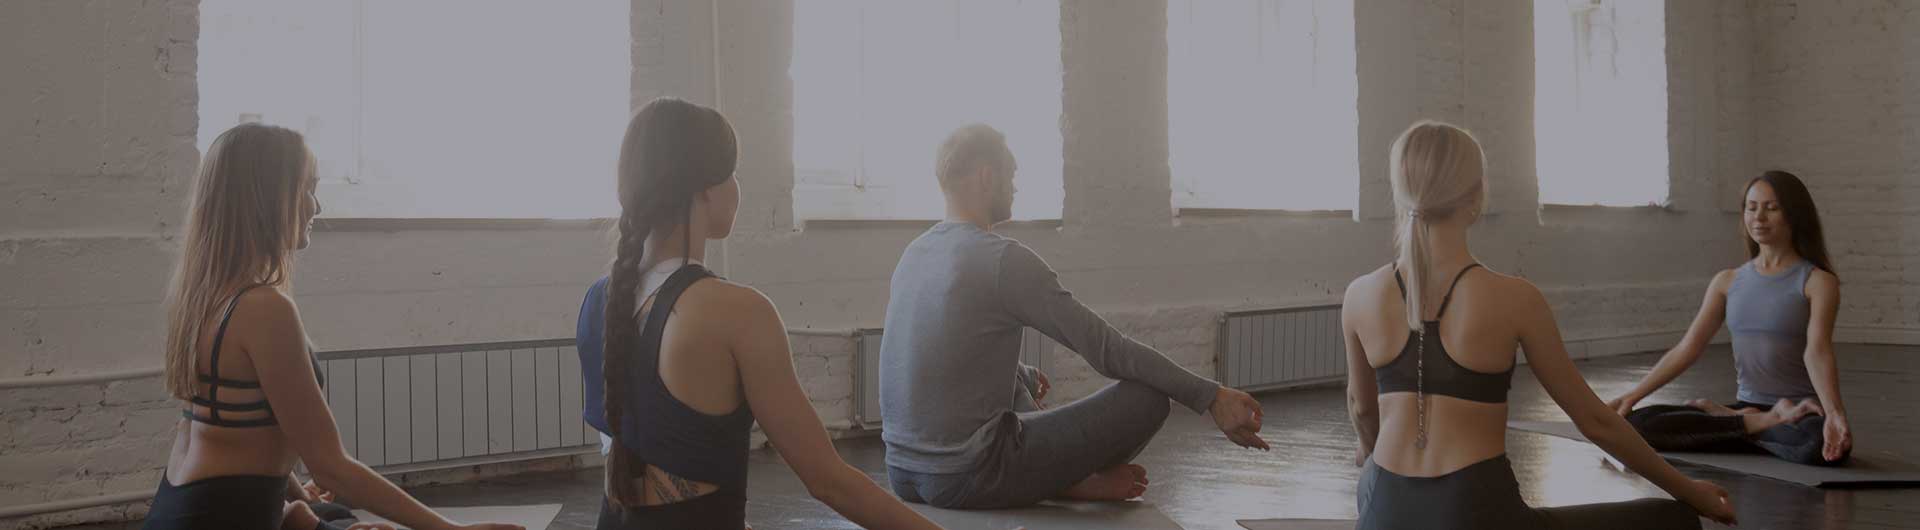 Several people sitting on the floor in a yoga class.